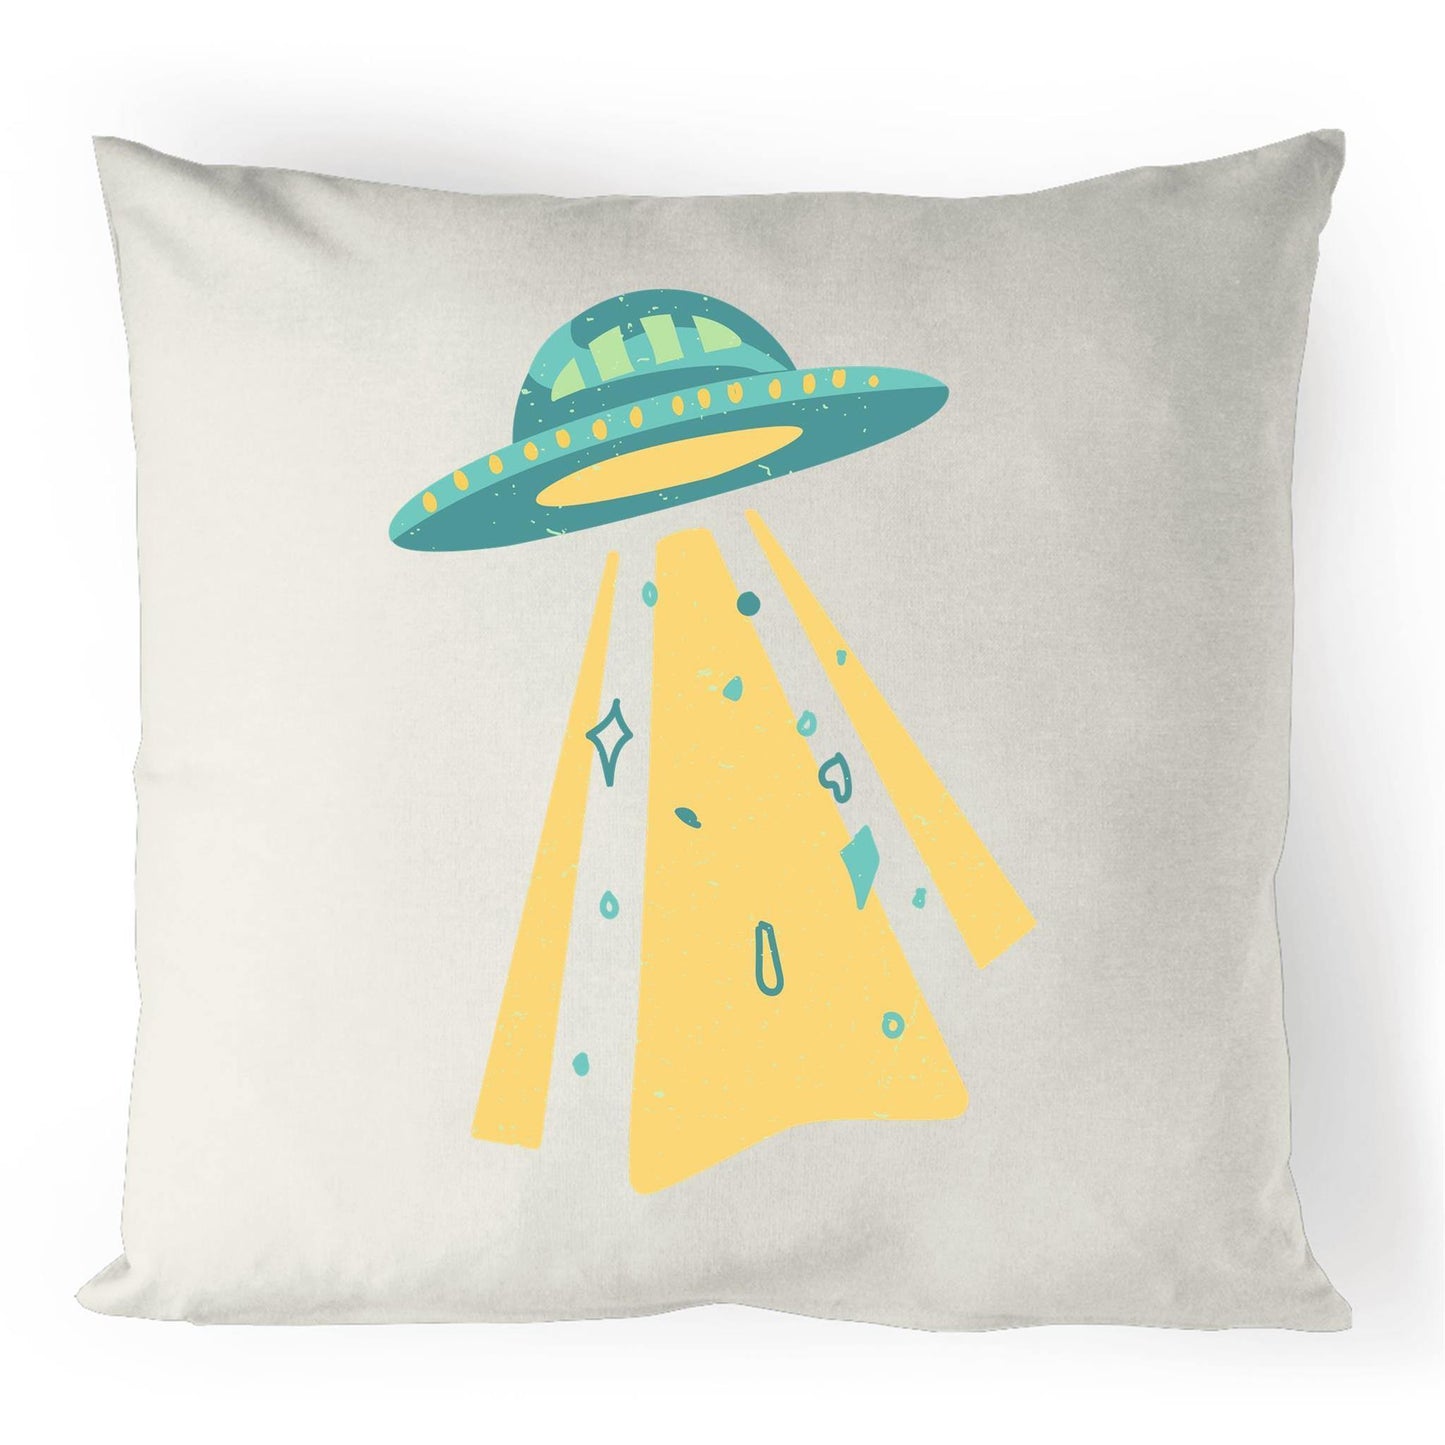 UFO - 100% Linen Cushion Cover Natural One-Size Linen Cushion Cover kids Sci Fi Space